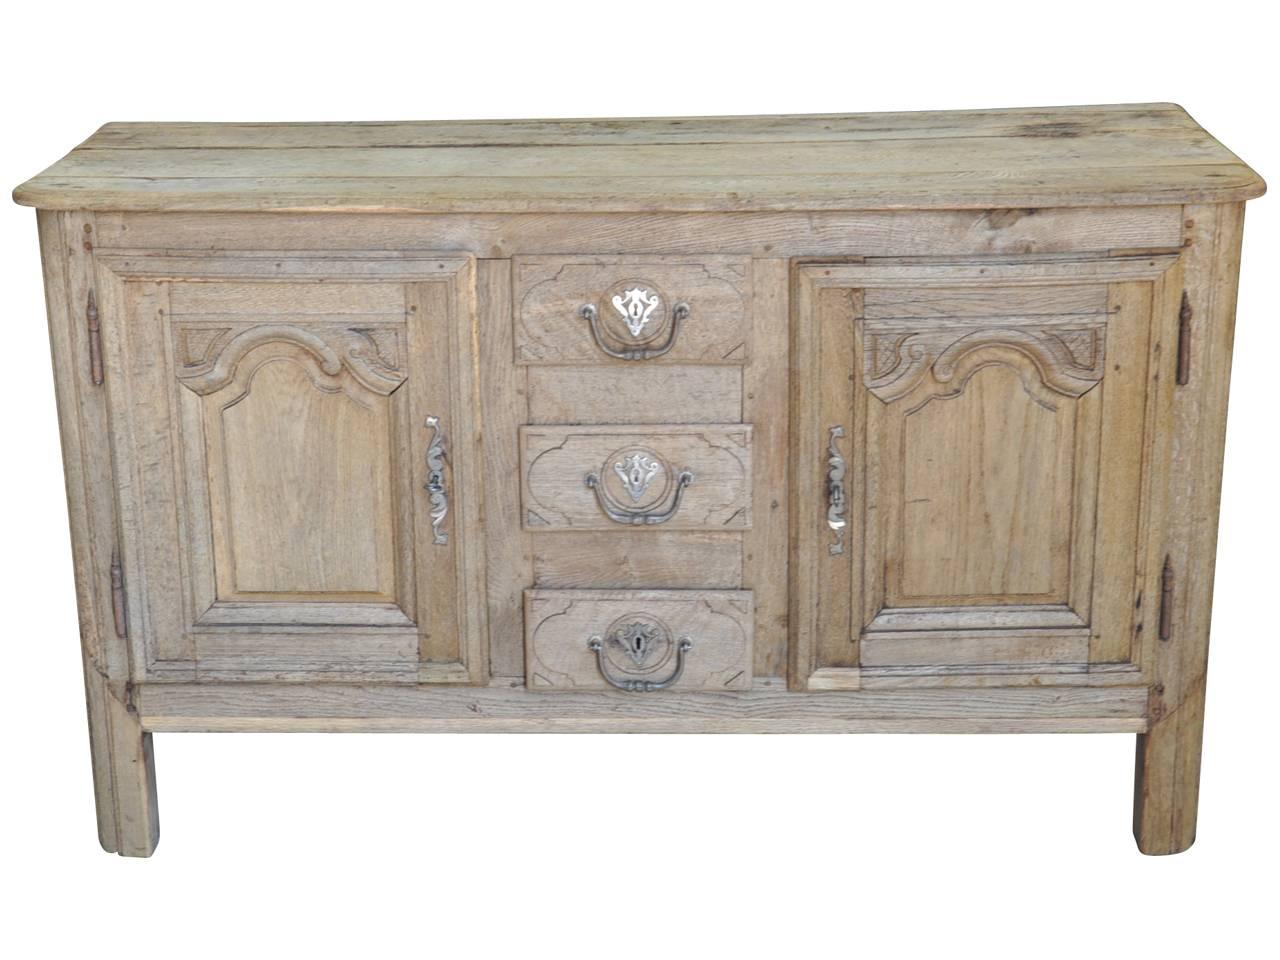 A very handsome French Louis XIV style buffet in bleached or washed oak. Beautifully constructed with two doors and three drawers. A great serving piece or to place a flat screen television above.